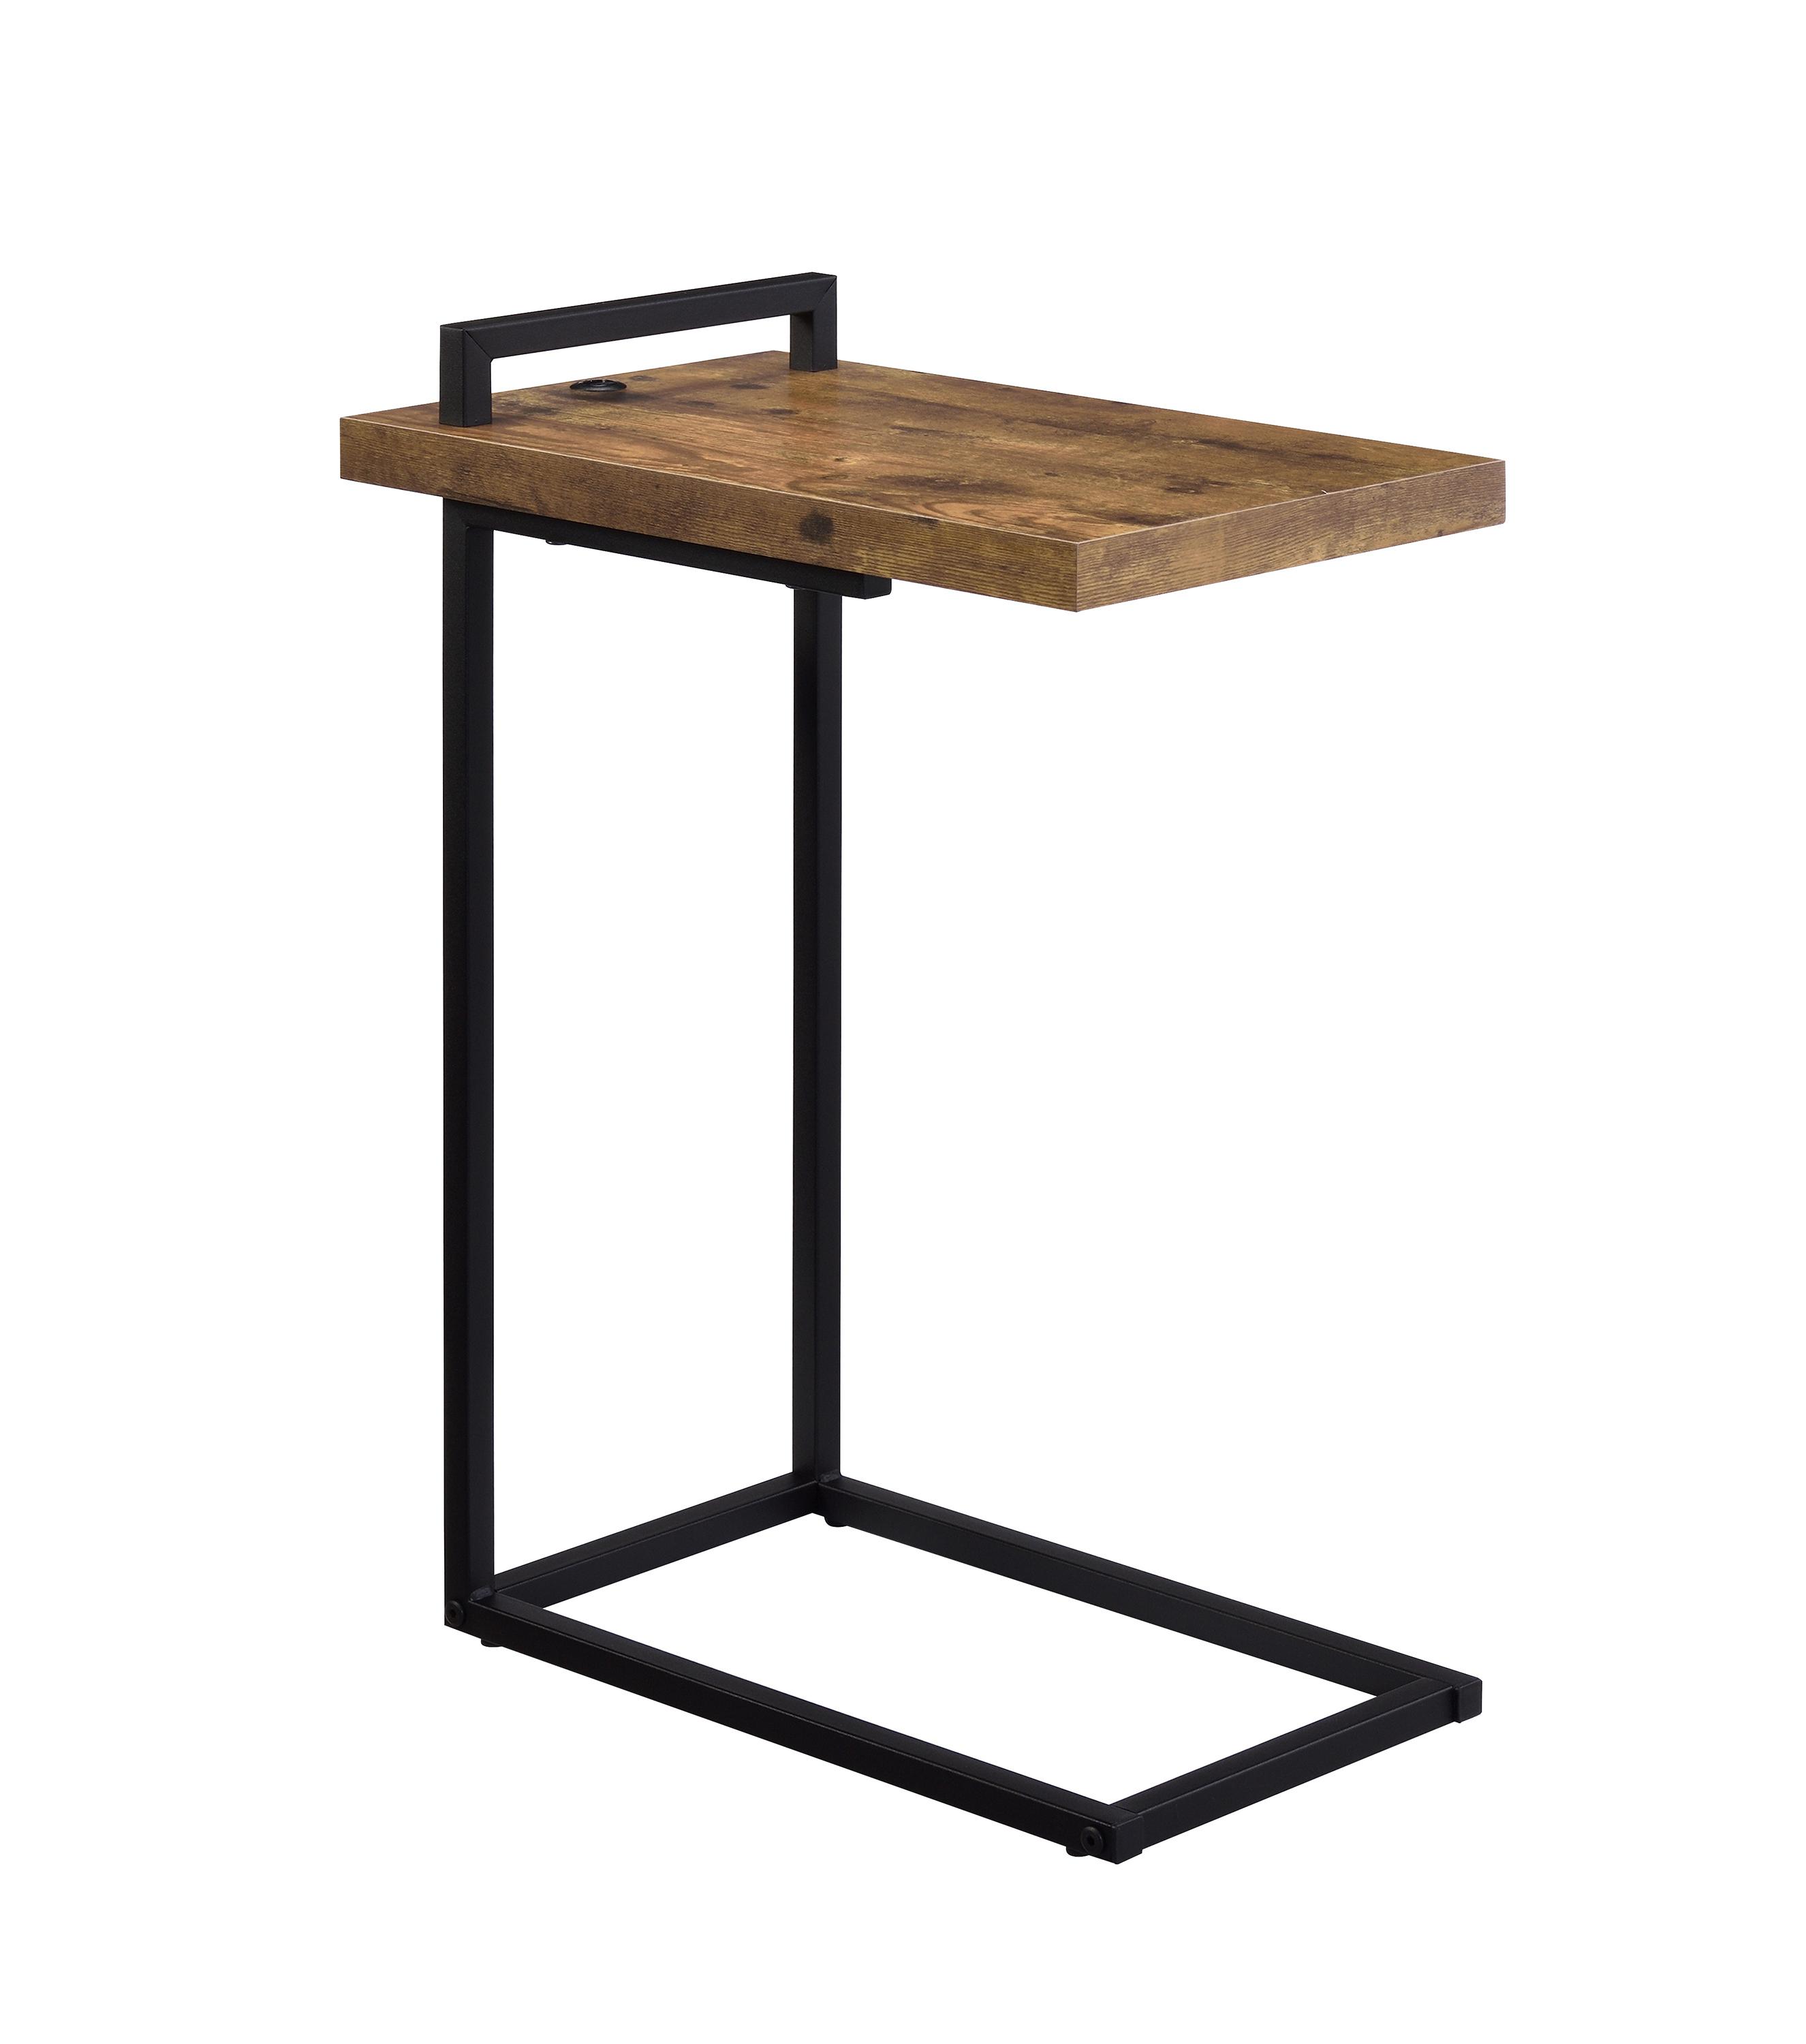 Modern Accent Table 931124 931124 in Nutmeg 